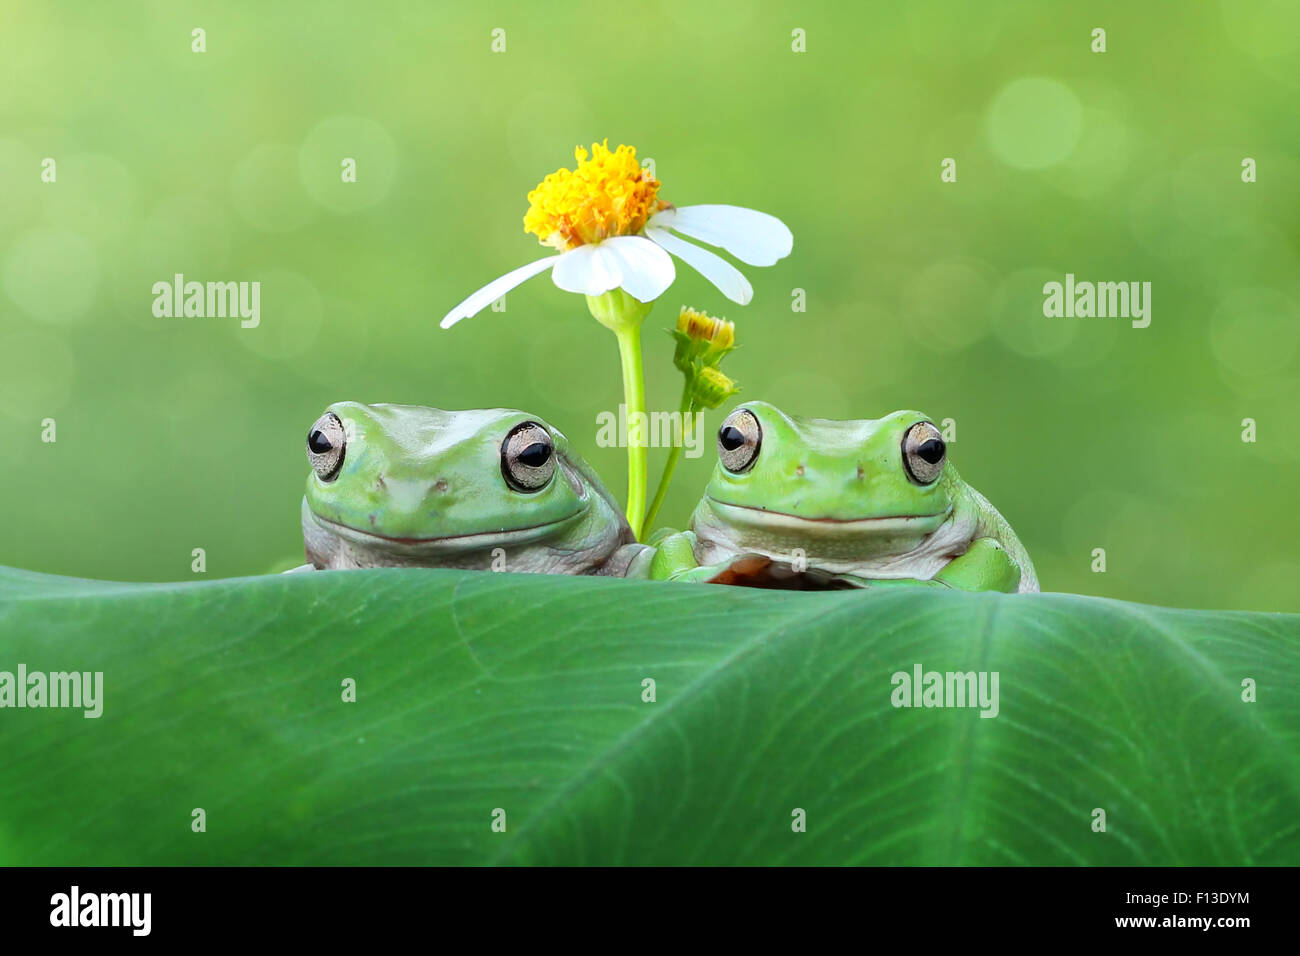 Two frogs on a leaf in front of a daisy Stock Photo